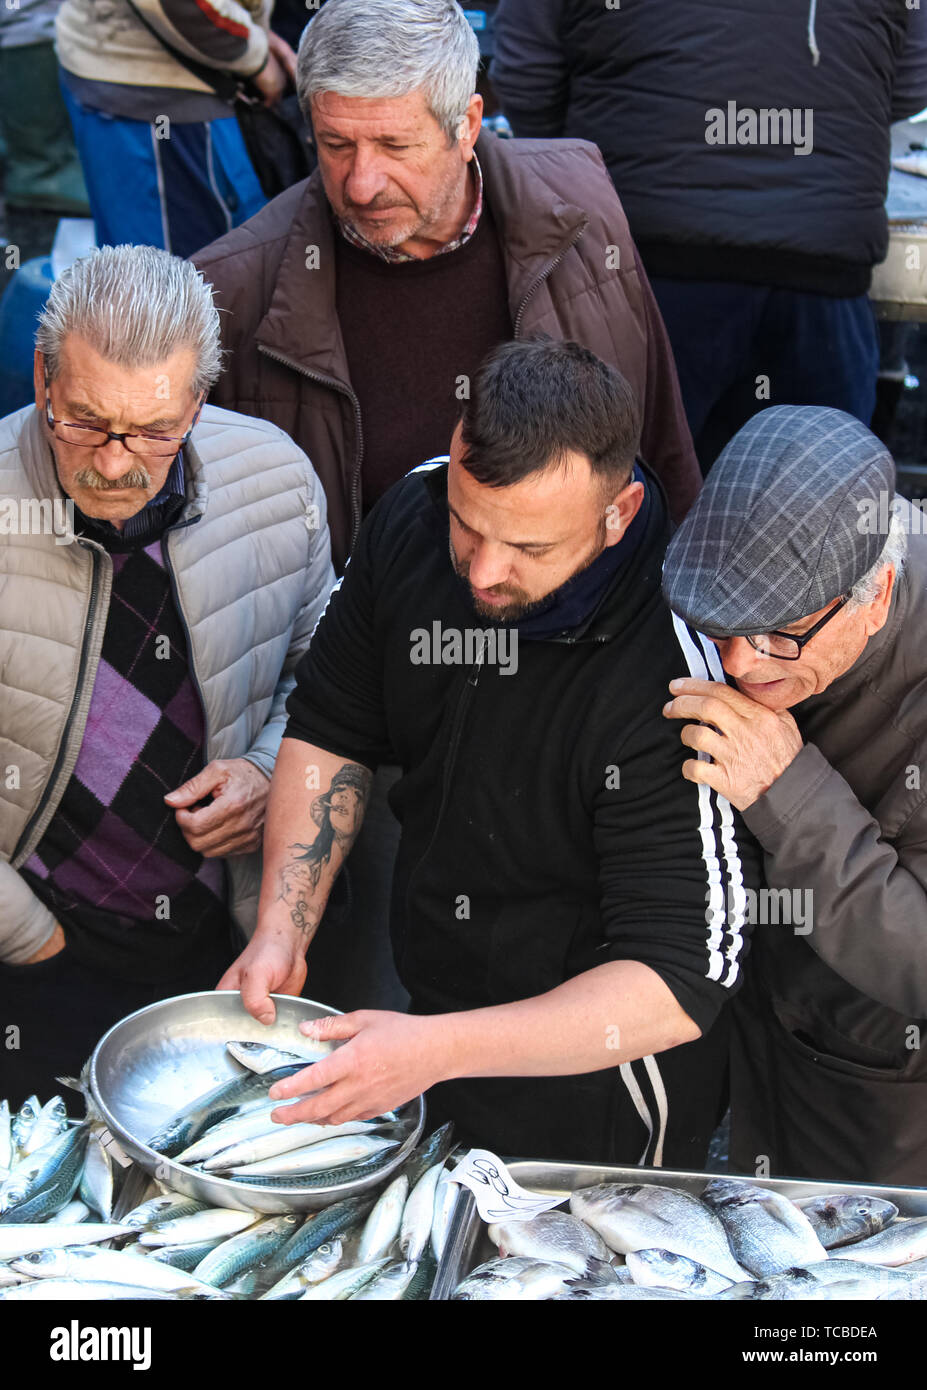 Catania, Sicily, Italy - Apr 10th 2019: Fishmonger selling fresh fish on traditional fish market. Older man, demanding customer, is touching him and giving instructions. Typical Italian market scene. Stock Photo